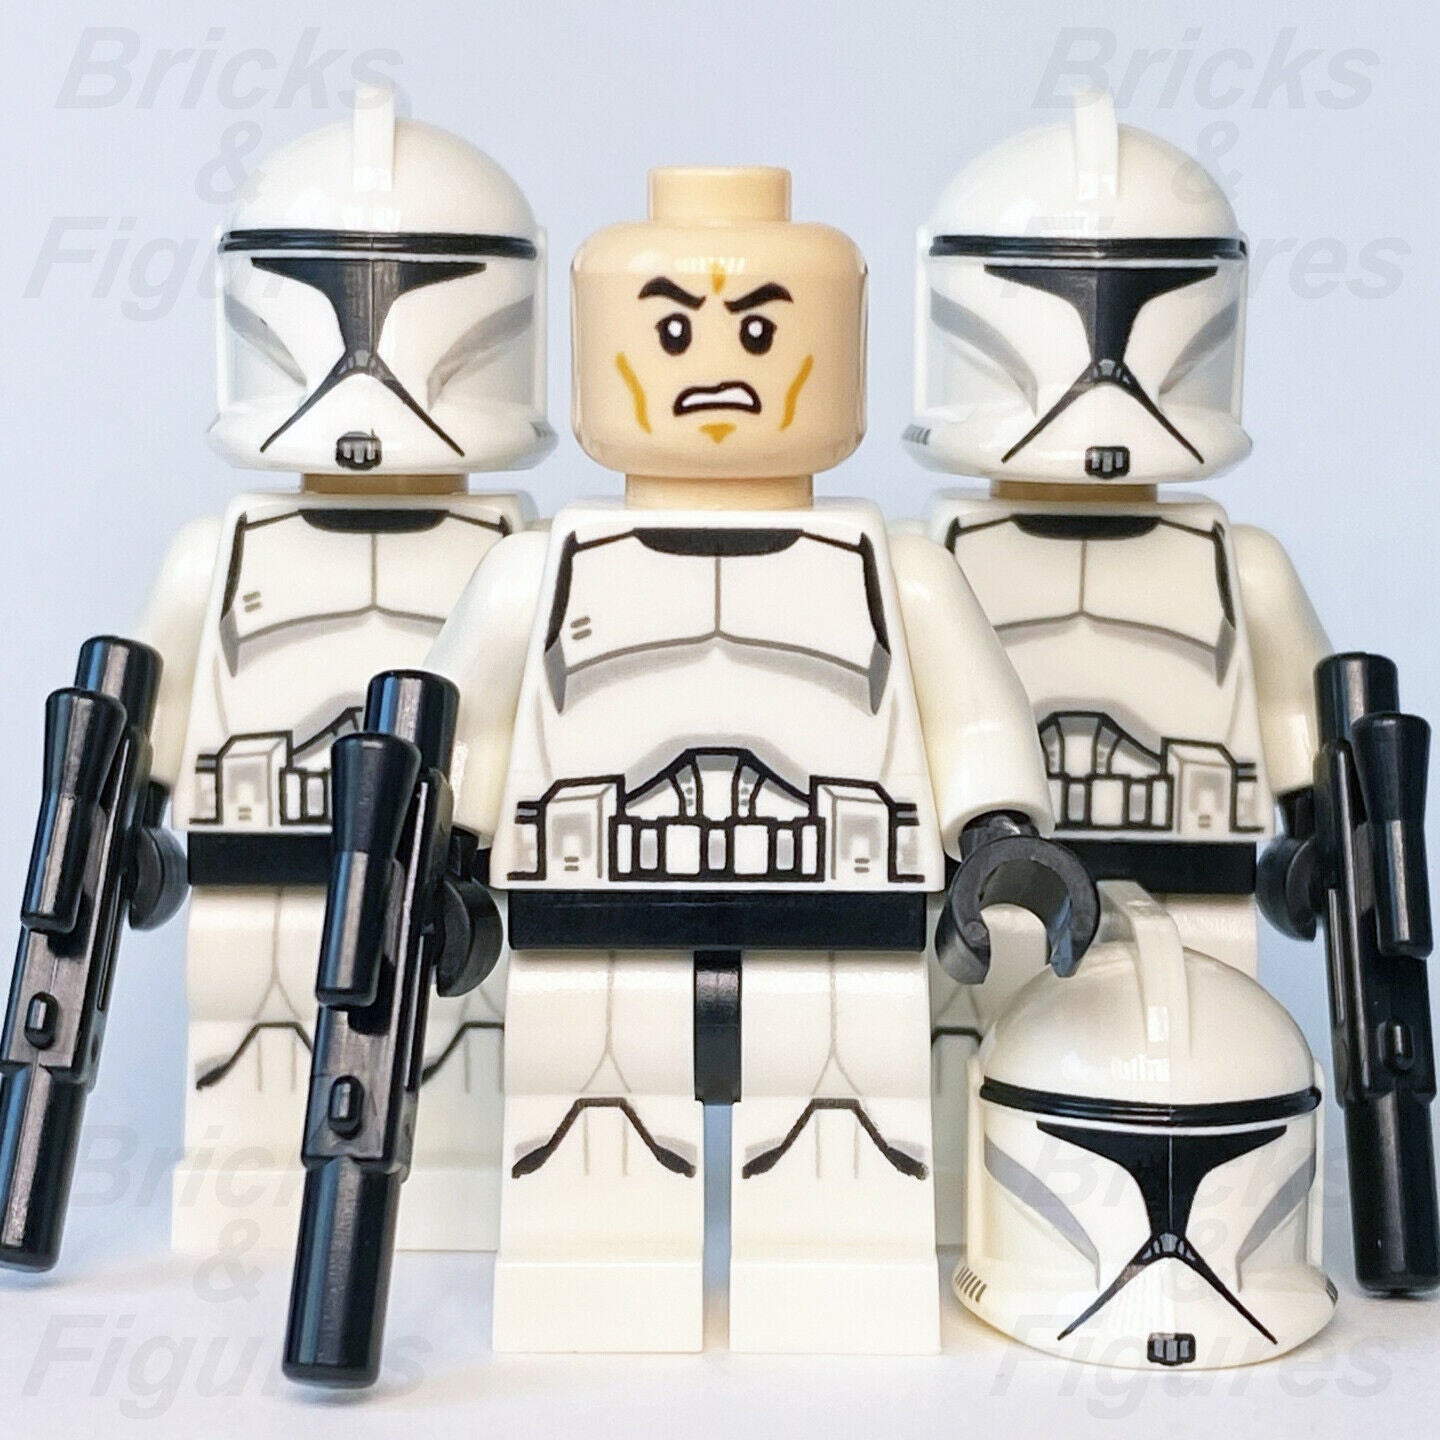 3 x Star Wars LEGO Phase 1 Clone Trooper Attack of the Clones Minifigure 75206 - Bricks & Figures